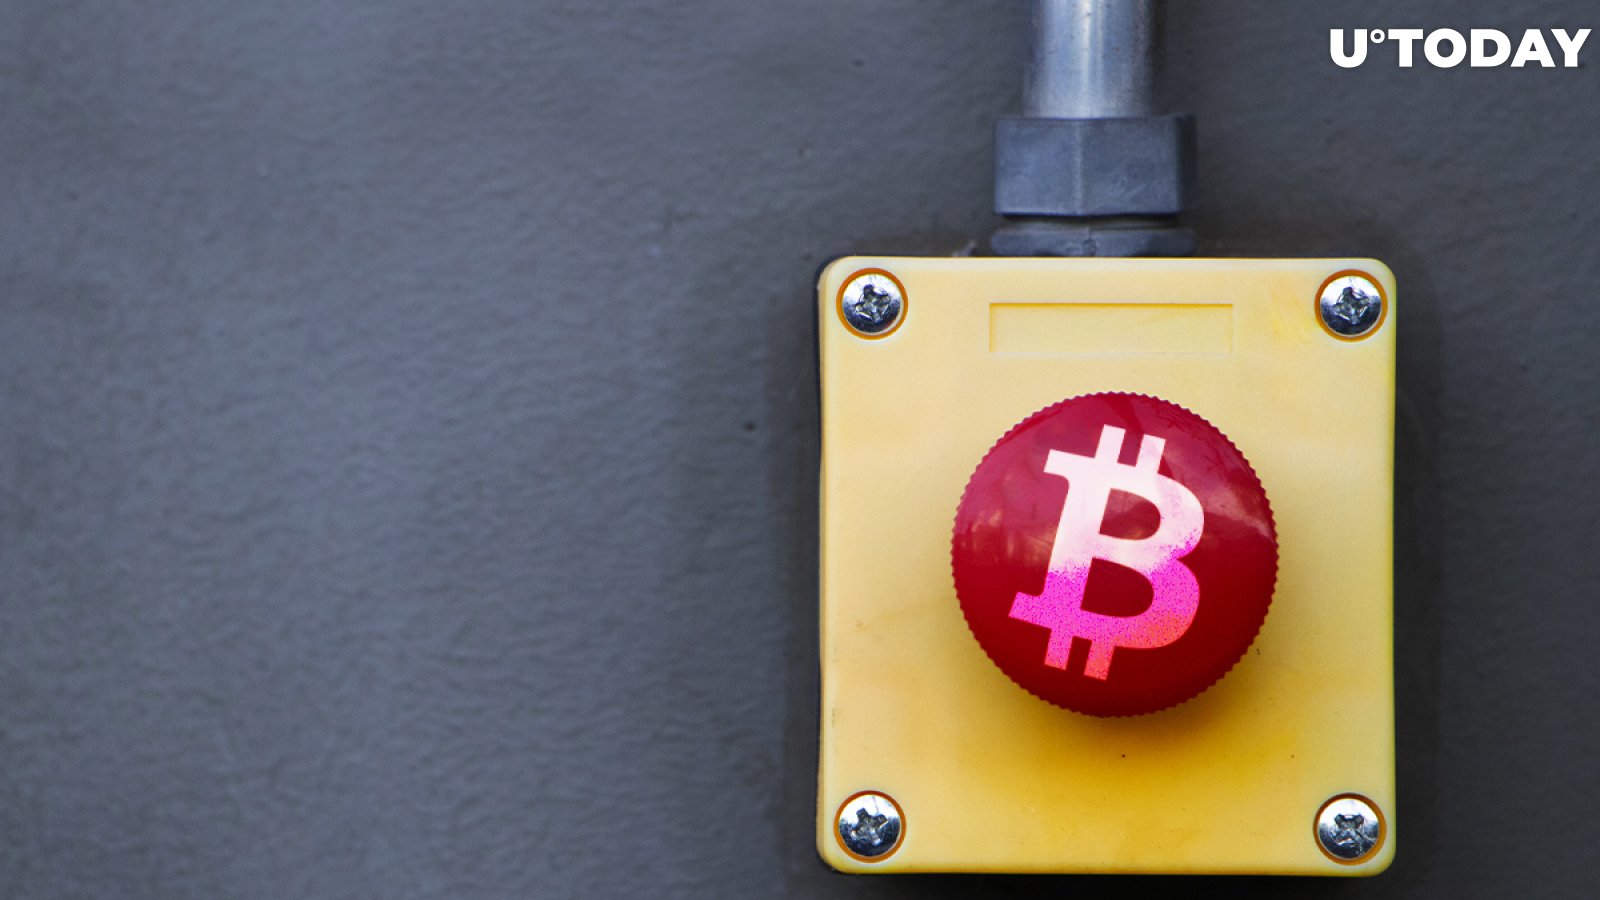 Lucky BTC Holder Activates Bitcoin Wallet with $17.4 Million After 8.8 Years